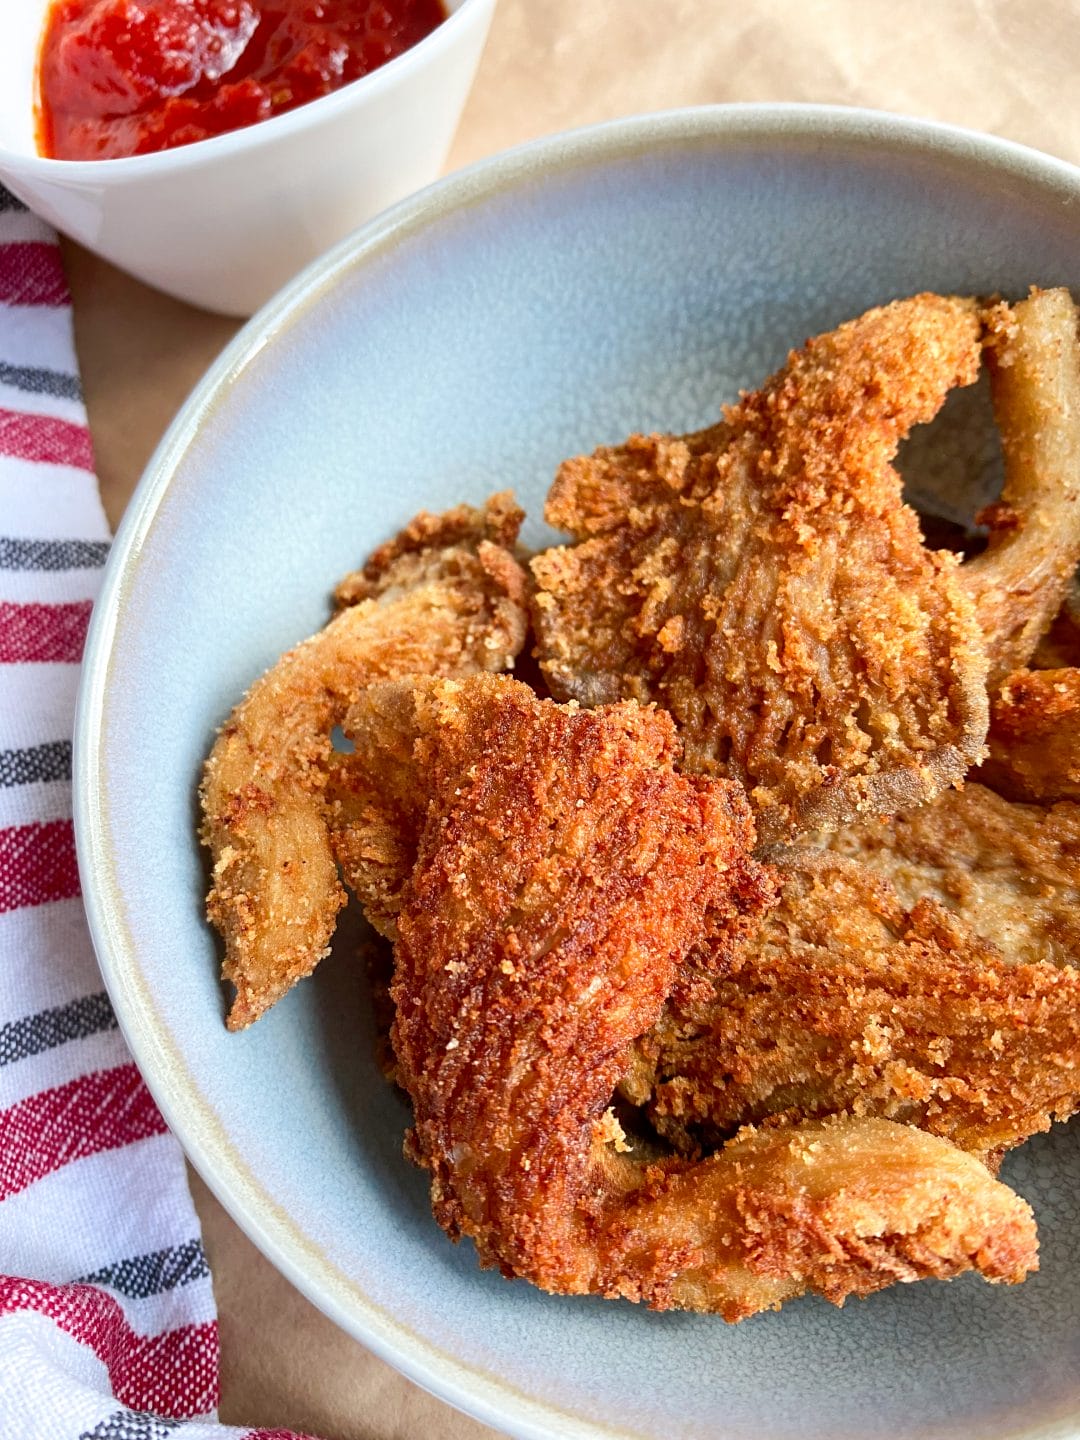 Picture of oyster mushroom fried chicken